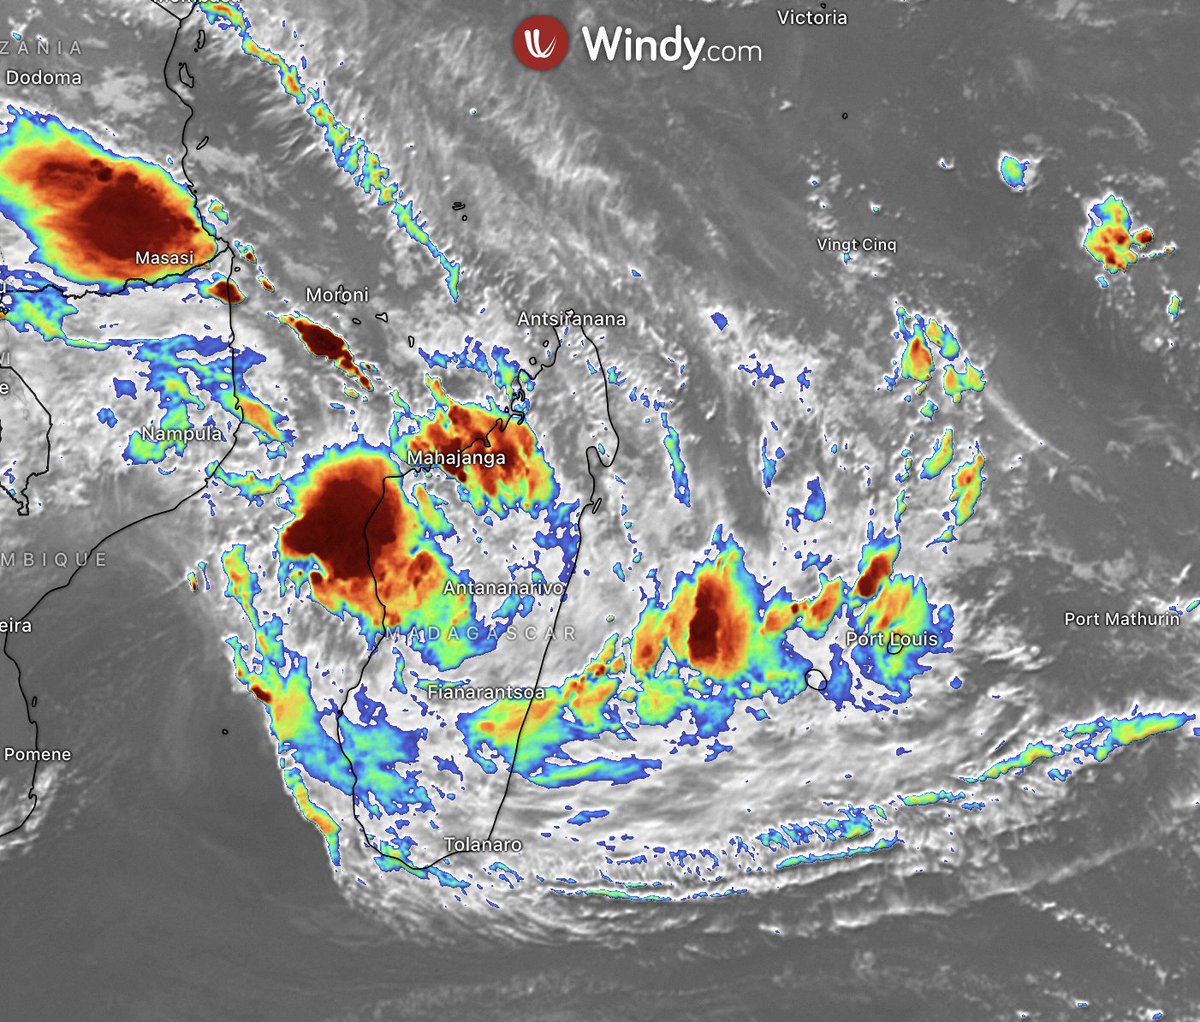 Storm #Cheneso continues to cause life-threatening flooding across #Madagascar as it moves southwest off of the land. See the latest forecast path at bit.ly/3XLzkUY